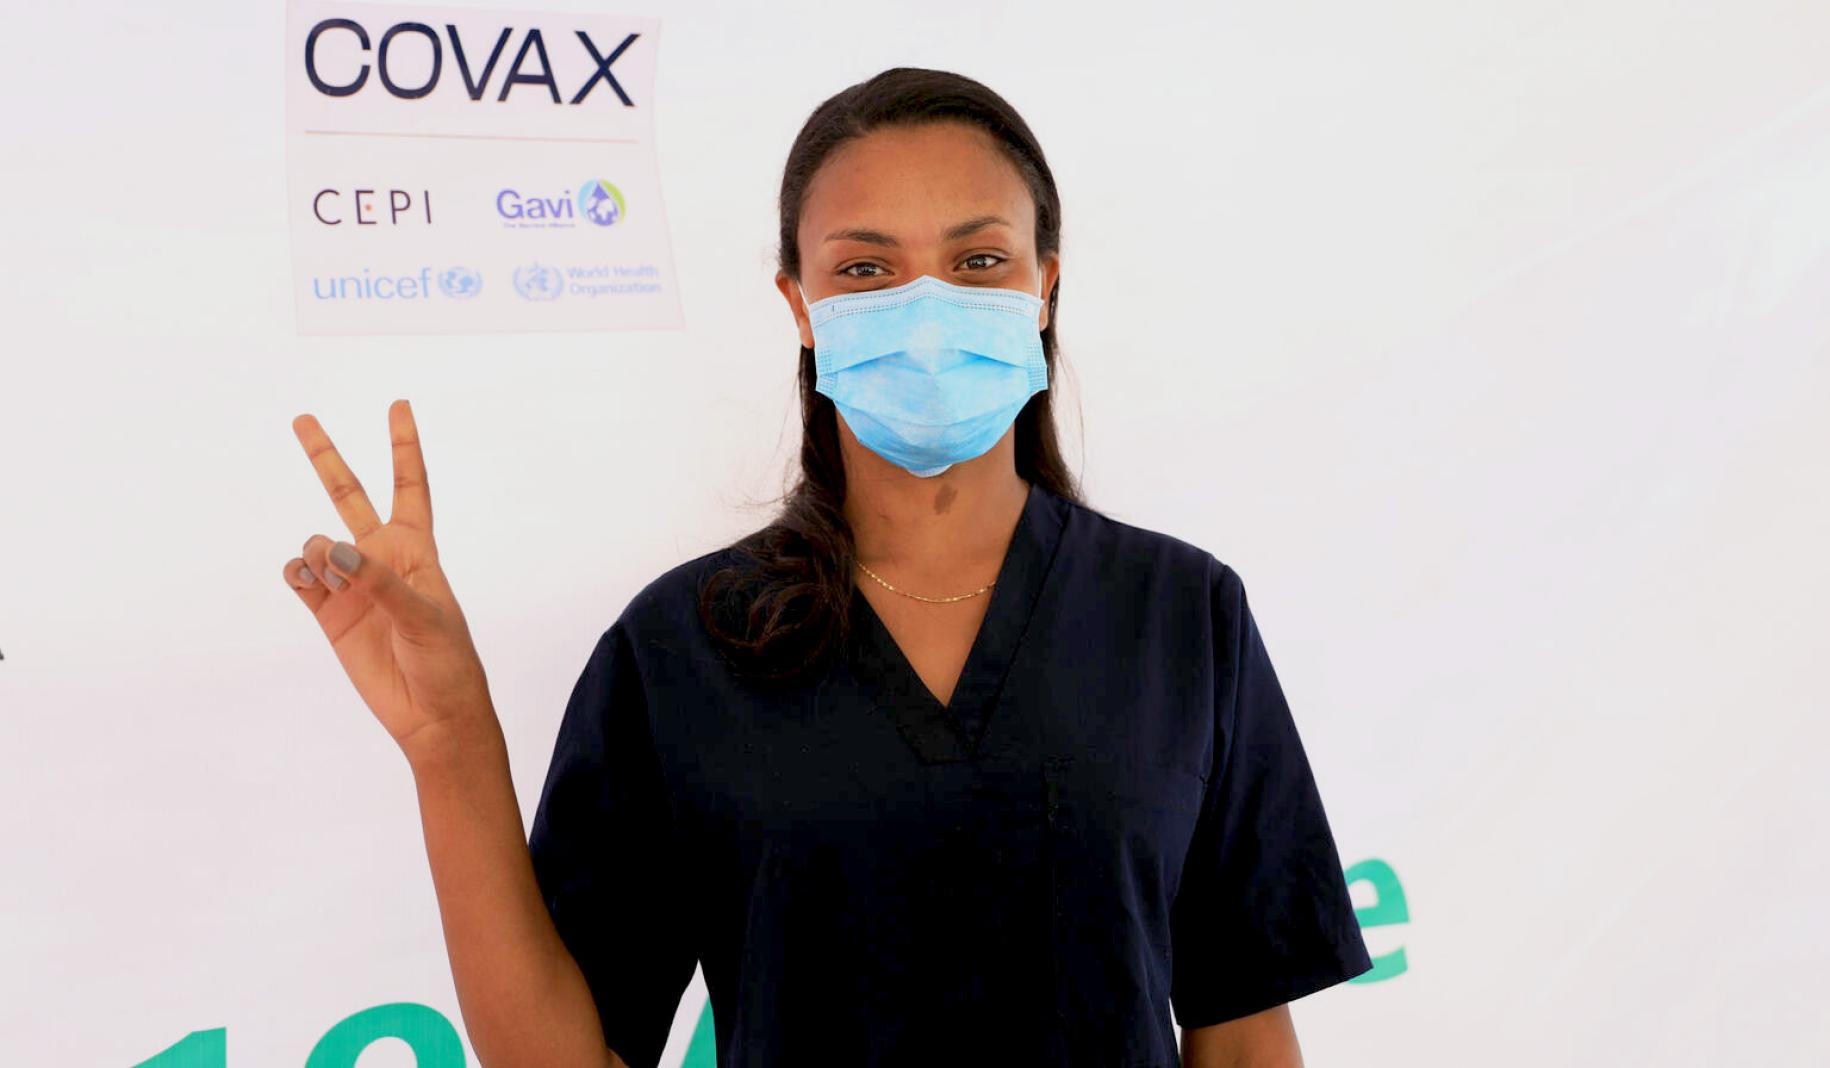 A healthcare professional stands by a COVAX sign and flashes a 'v' with her fingers to signify she was vaccinated.